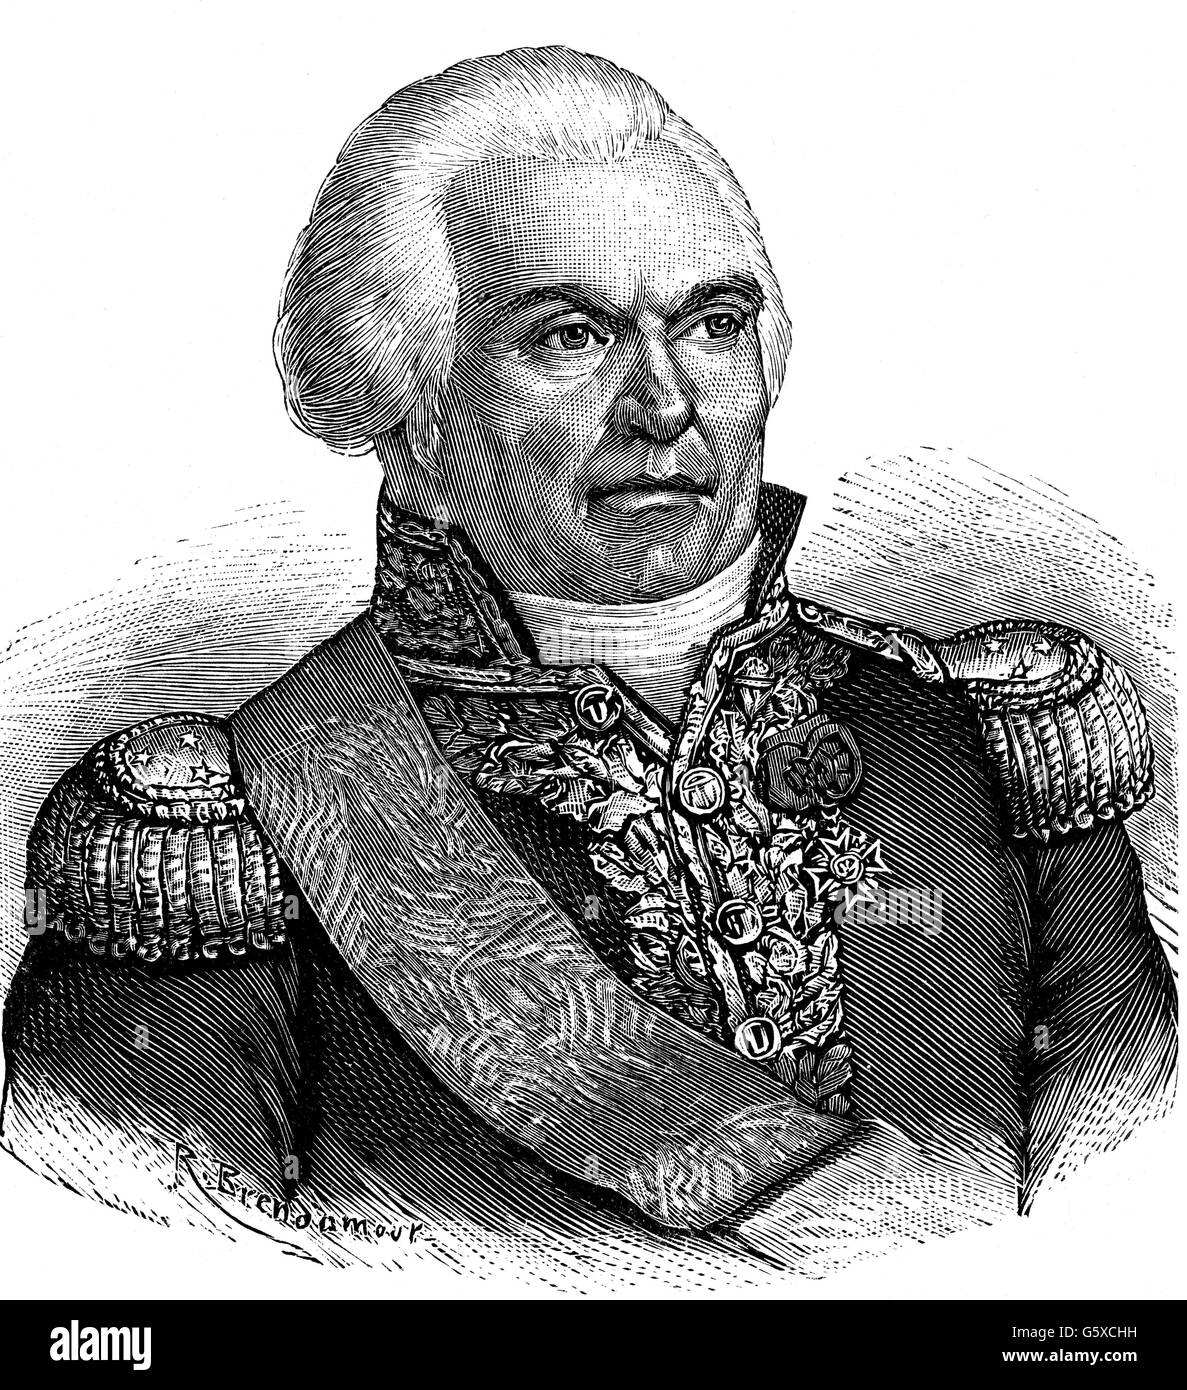 Martin, Pierre, 29.1.1752 - 1820, French admiral, portrait, lithograph by Lemercier, 19th century, Stock Photo